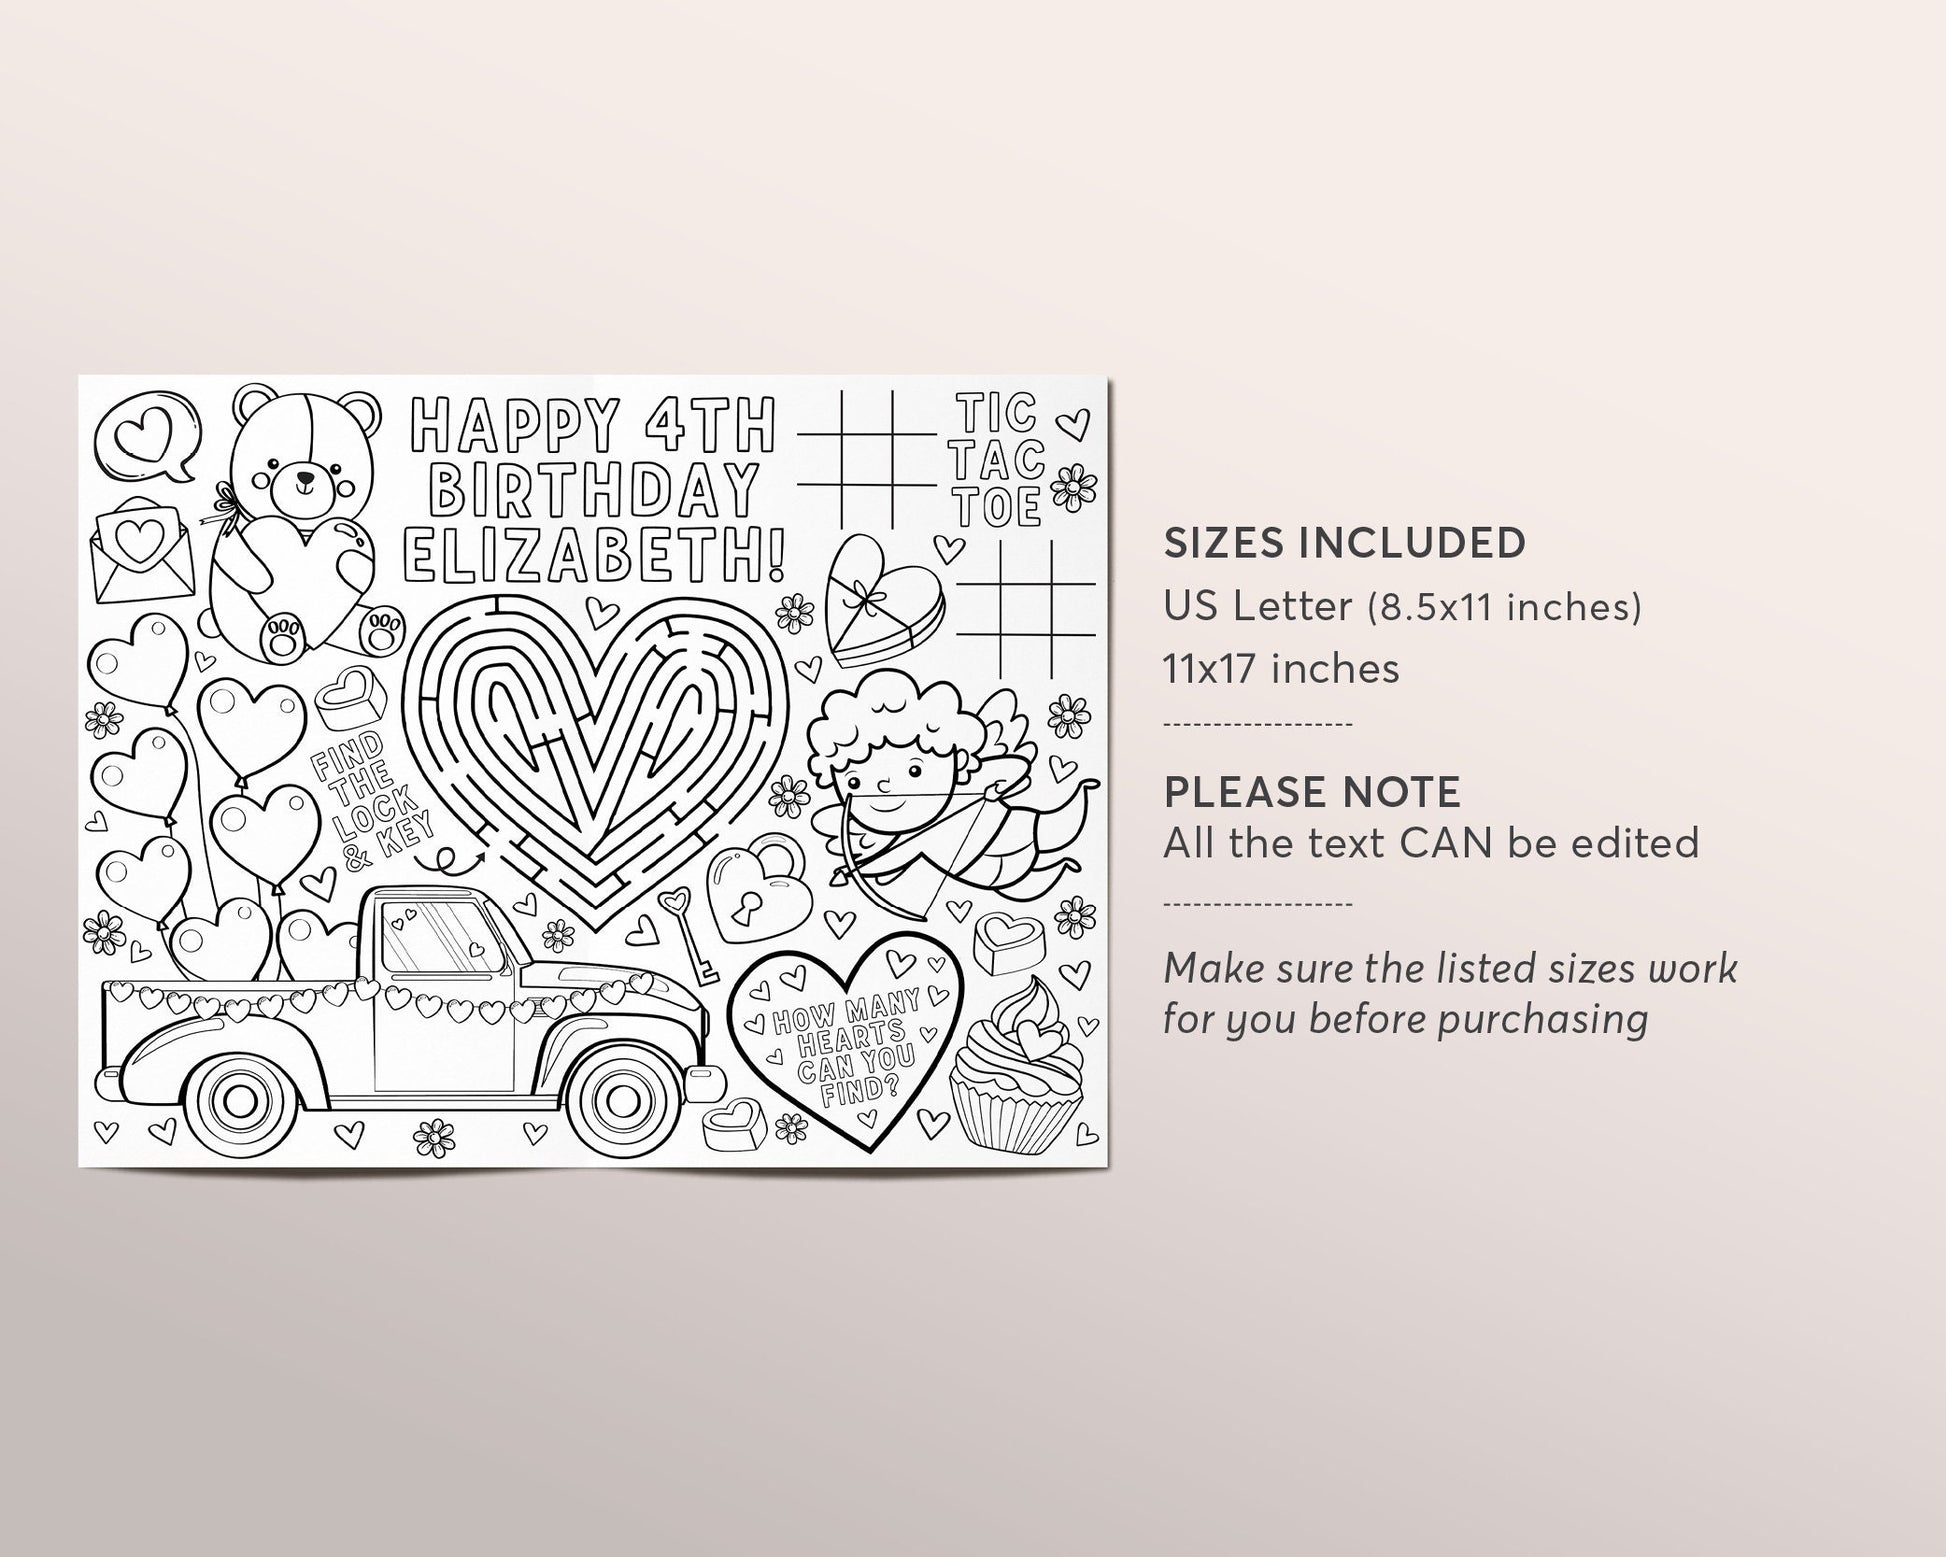 Wedding coloring book activity book Printable Personalized Favor Kids 8.5 x  11 PDF or JPEG TEMPLATE